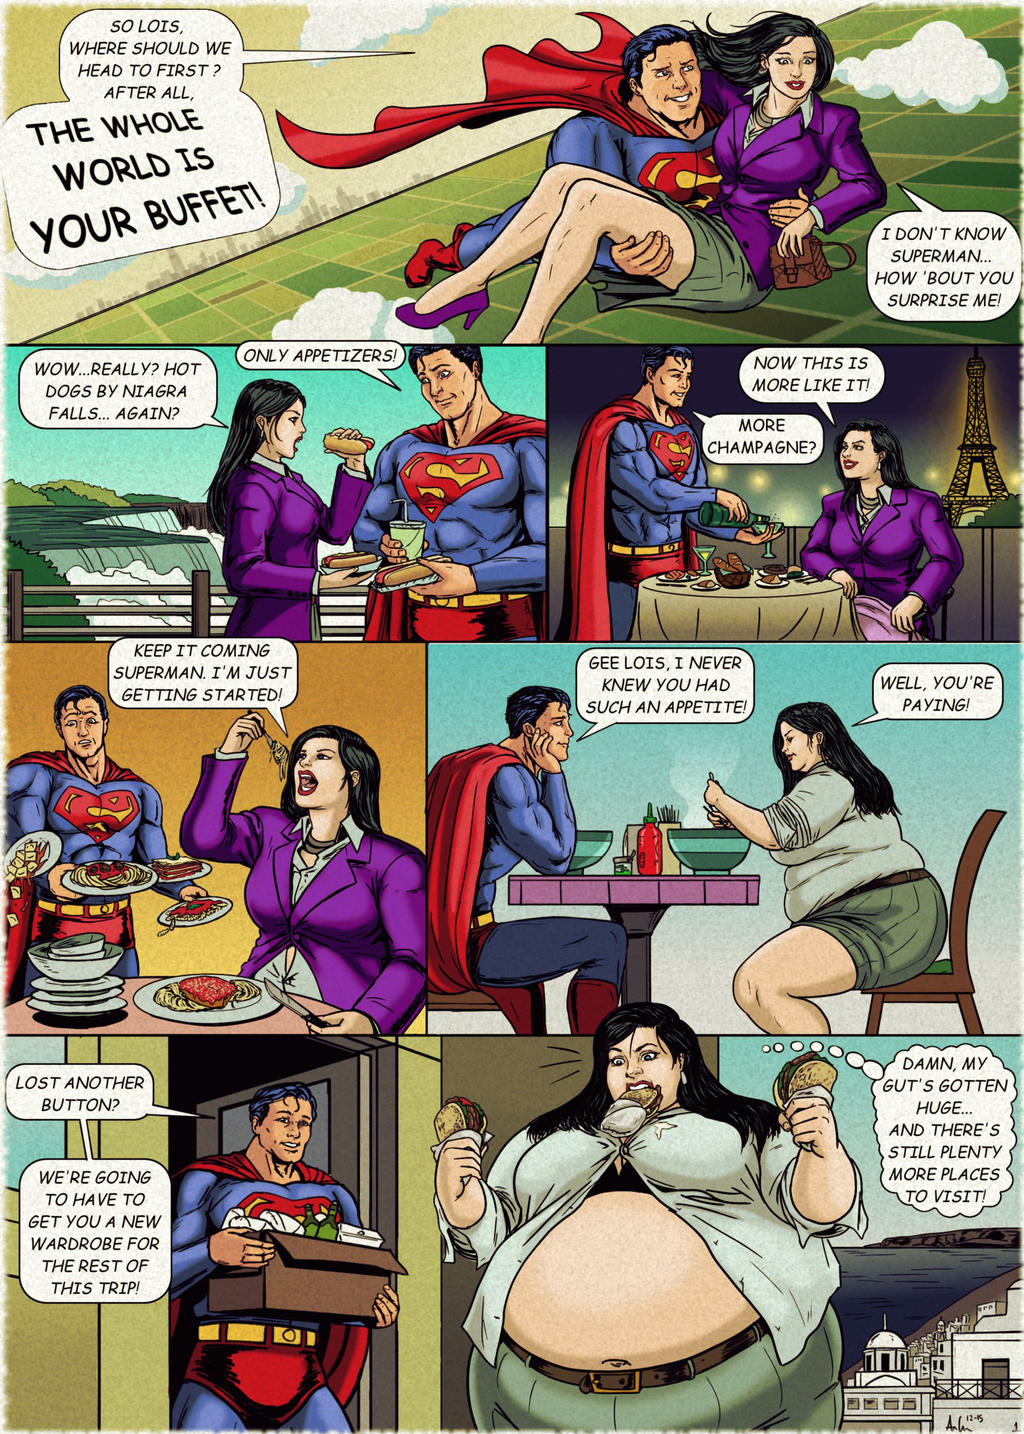 I must admit, tho, Superman loves fat Lois Lane is a guilty pleasure of min...